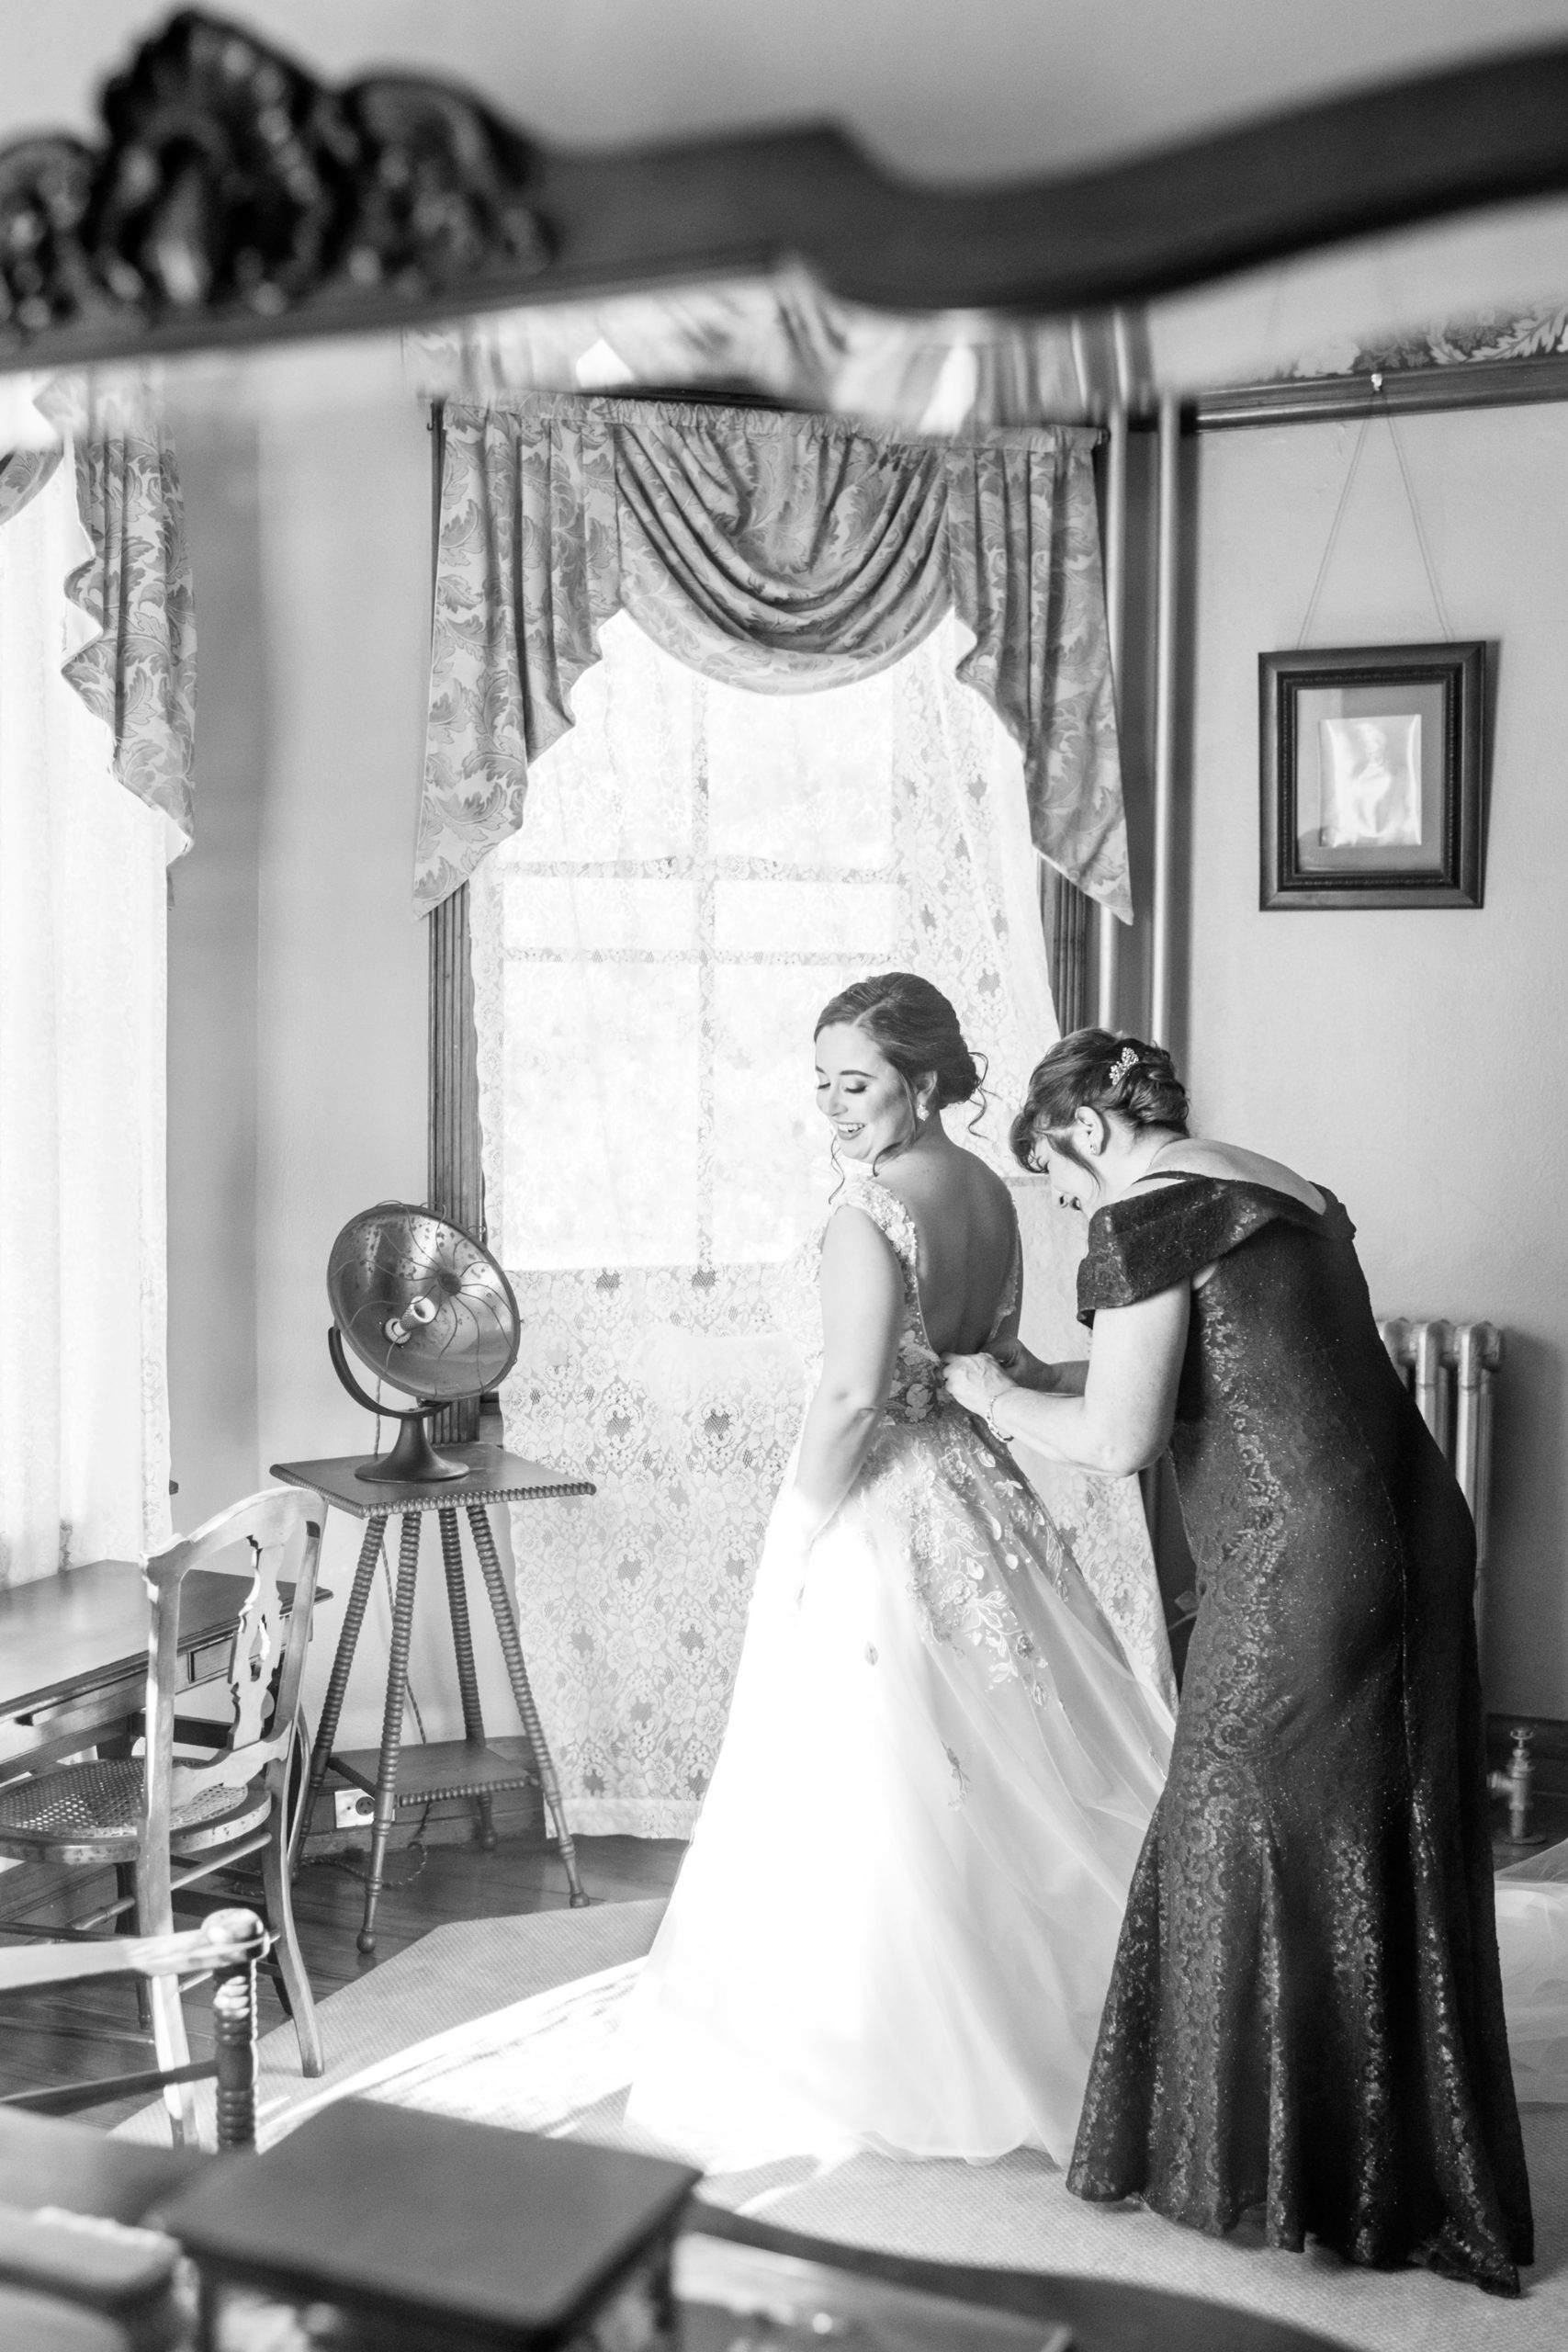 bride getting ready at Knowlton Mansion